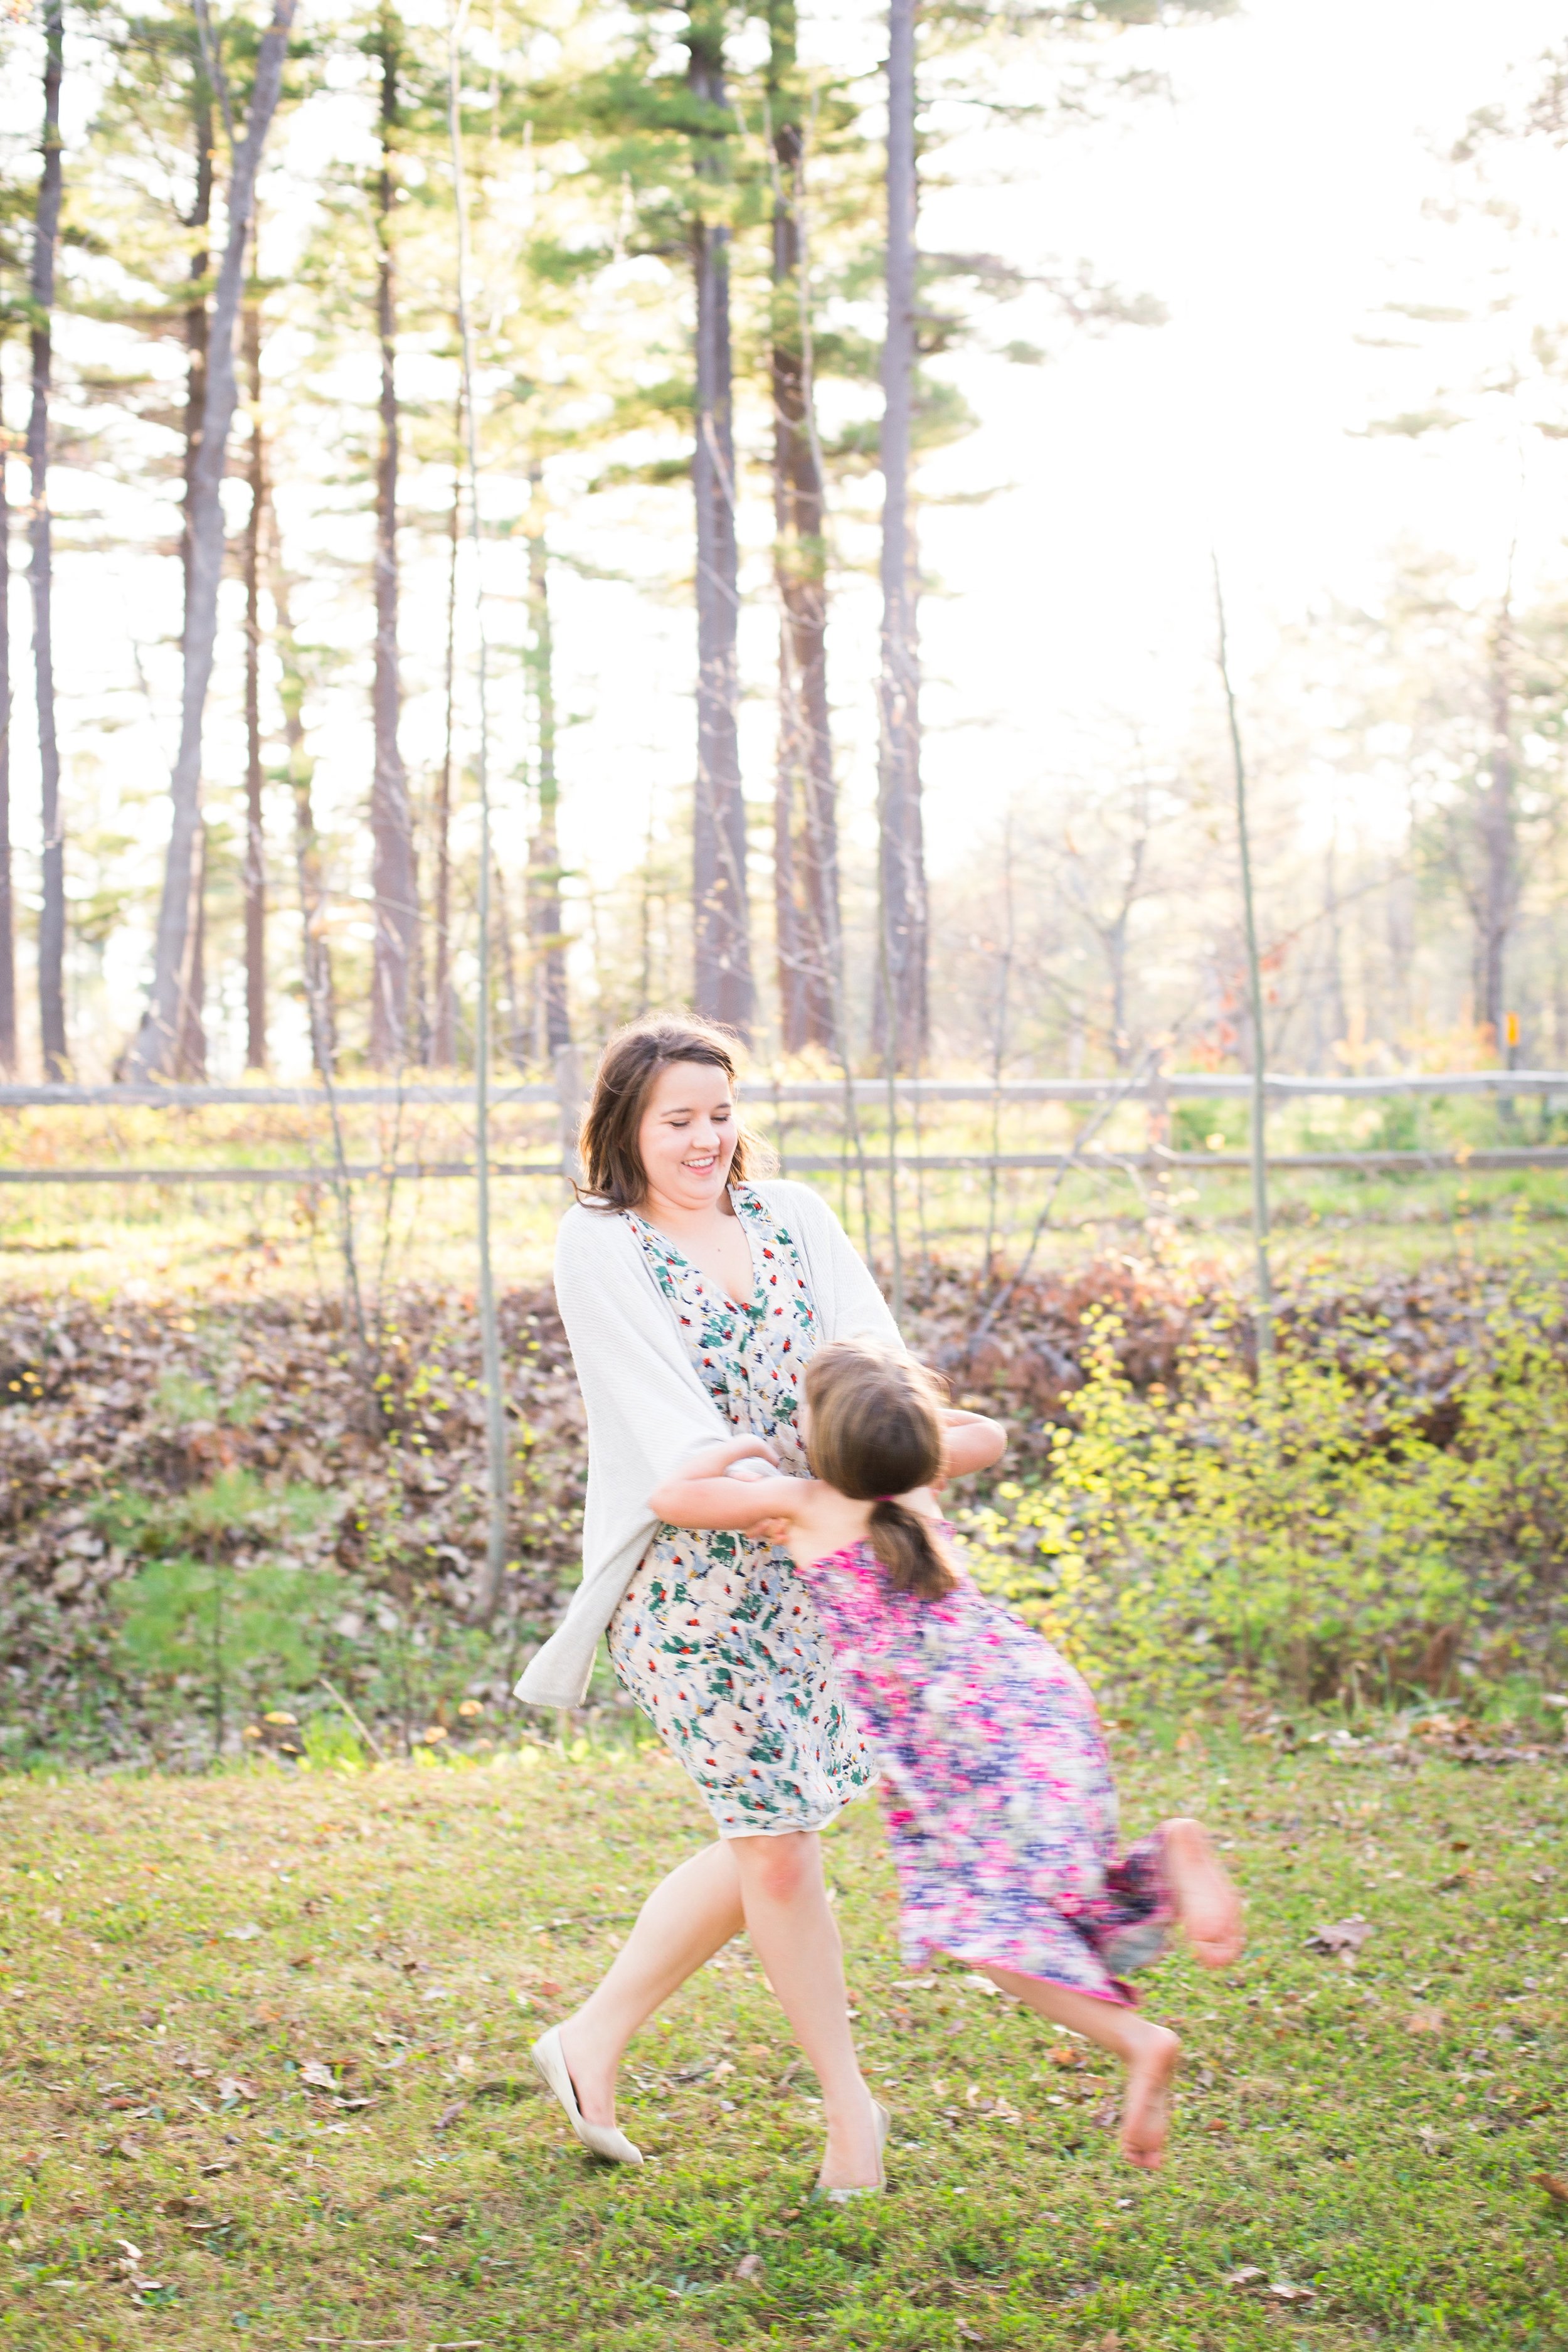 Mommy and Me Whimsical and fun outdoor portrait session by Seattle Photographer Janelle Elaine Photography.jpg